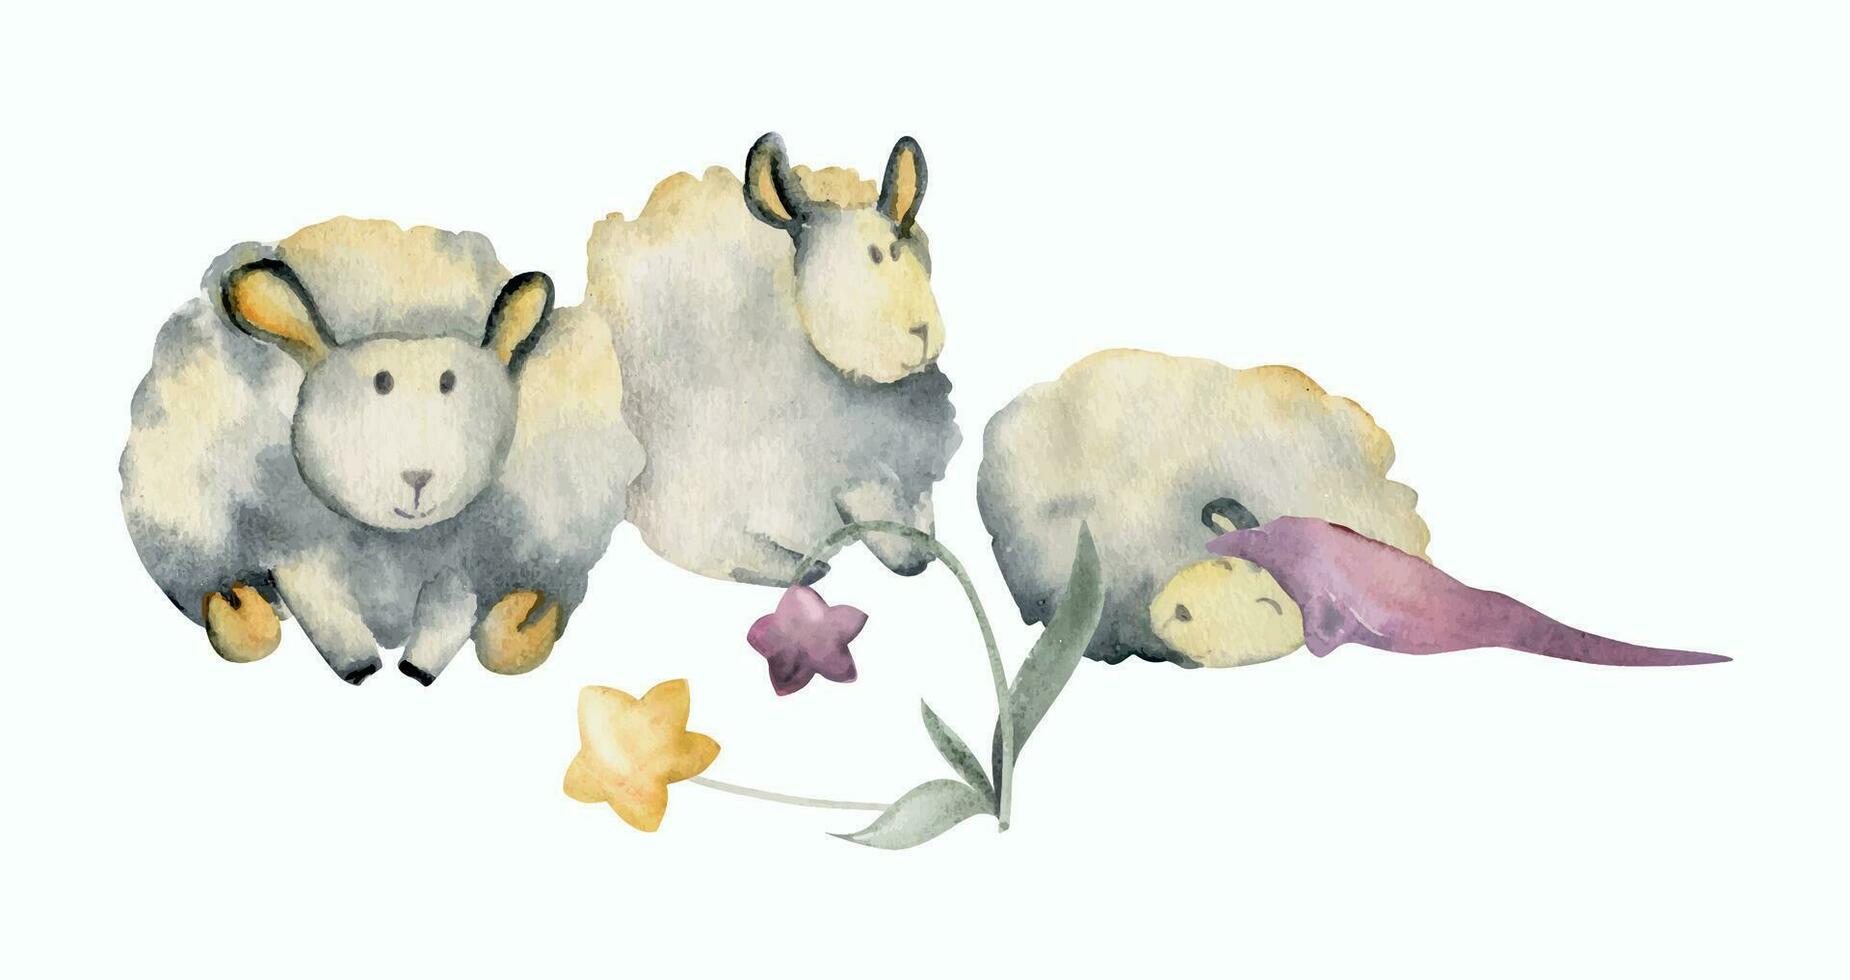 Watercolor hand drawn illustration, cute little plush baby sheep with magical star flowers. Textured effect. Composition isolated on white background. For kids, children bedroom, fabric, linens print vector